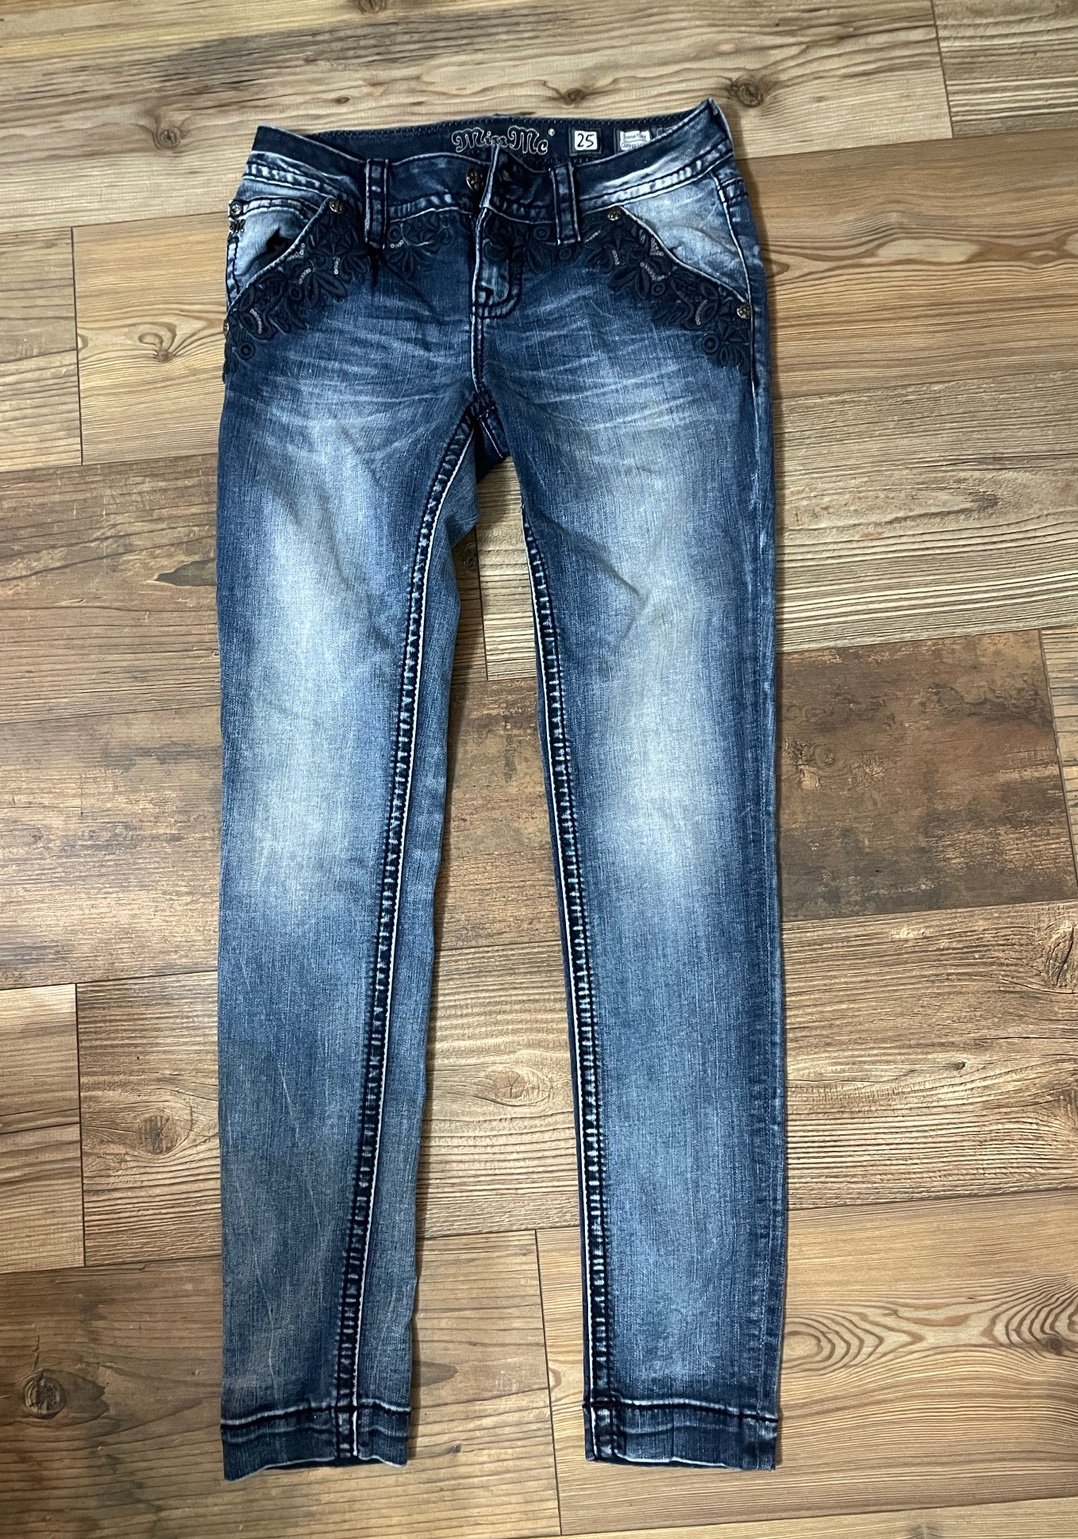 Cheap Miss Me Jeans size25 iVY8SKBPE all for you